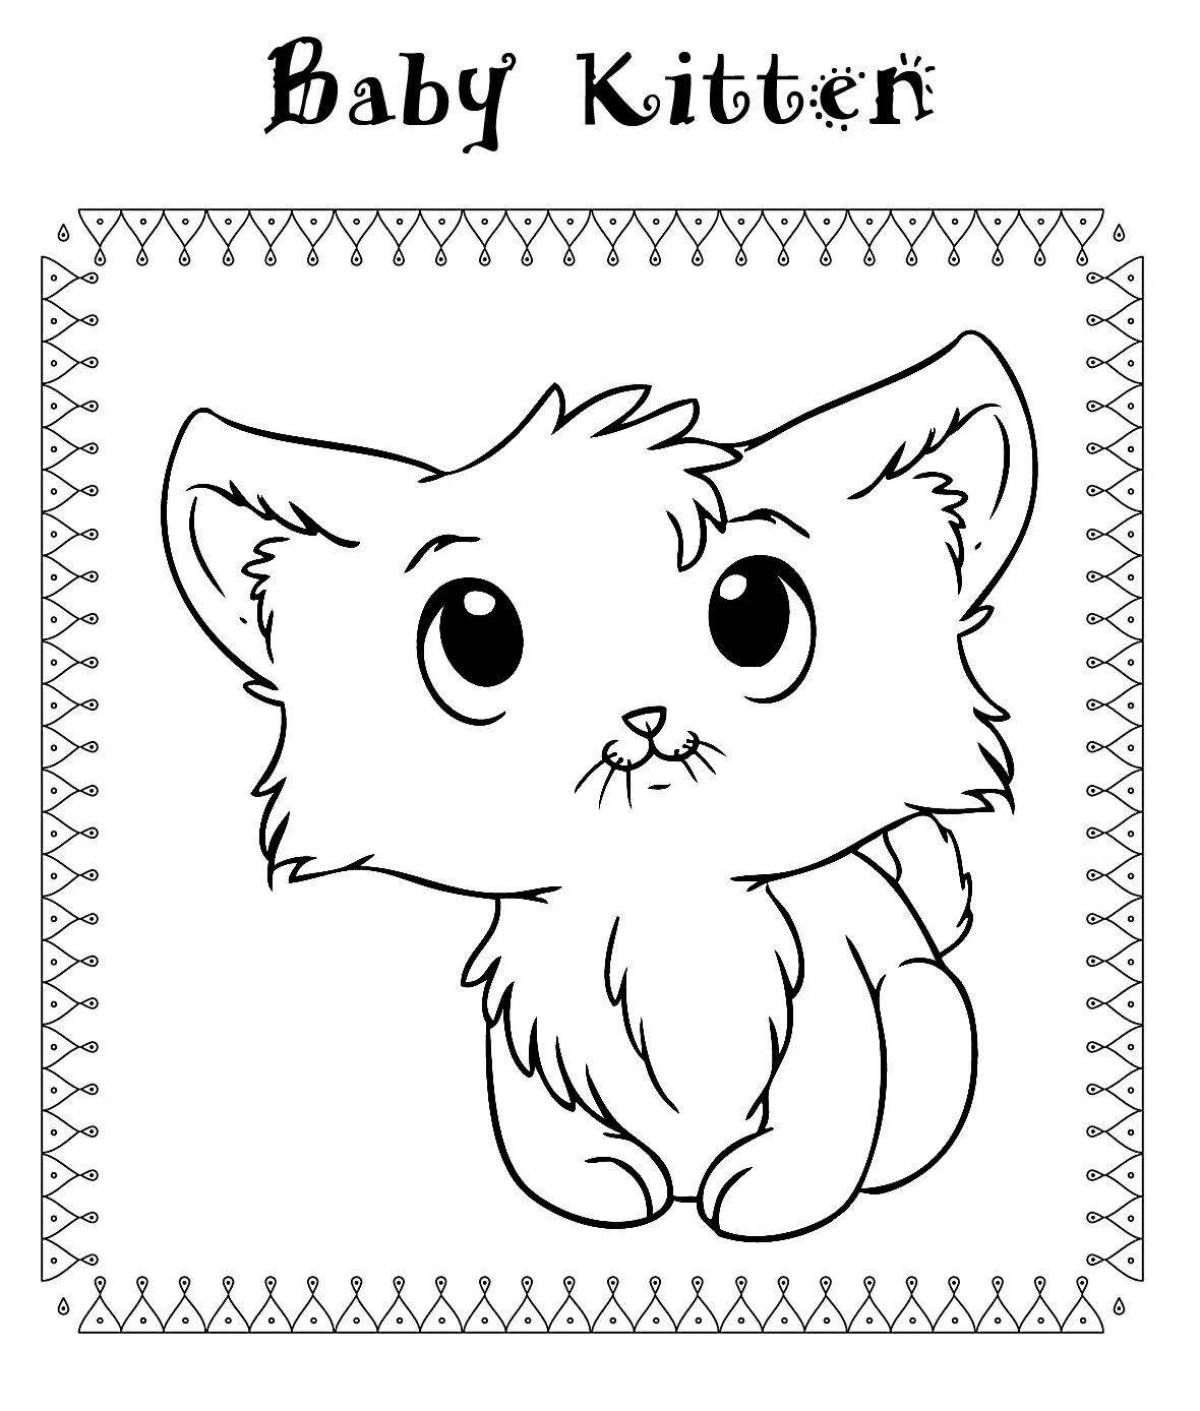 Coloring page adorable kitty